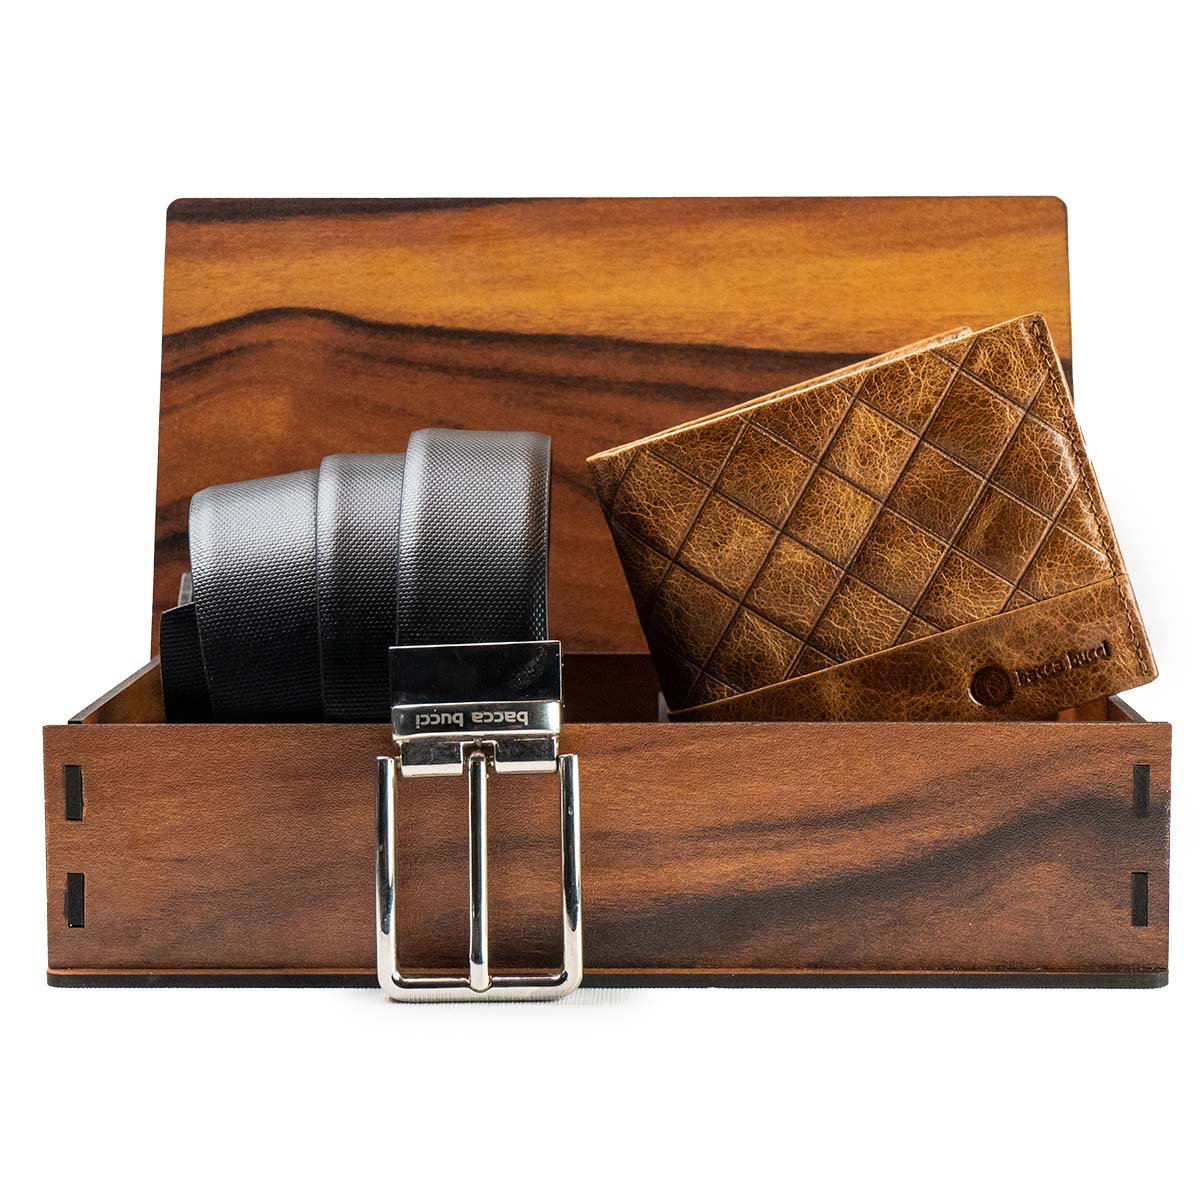 Bacca bucci Belt and wallet Combo for Men